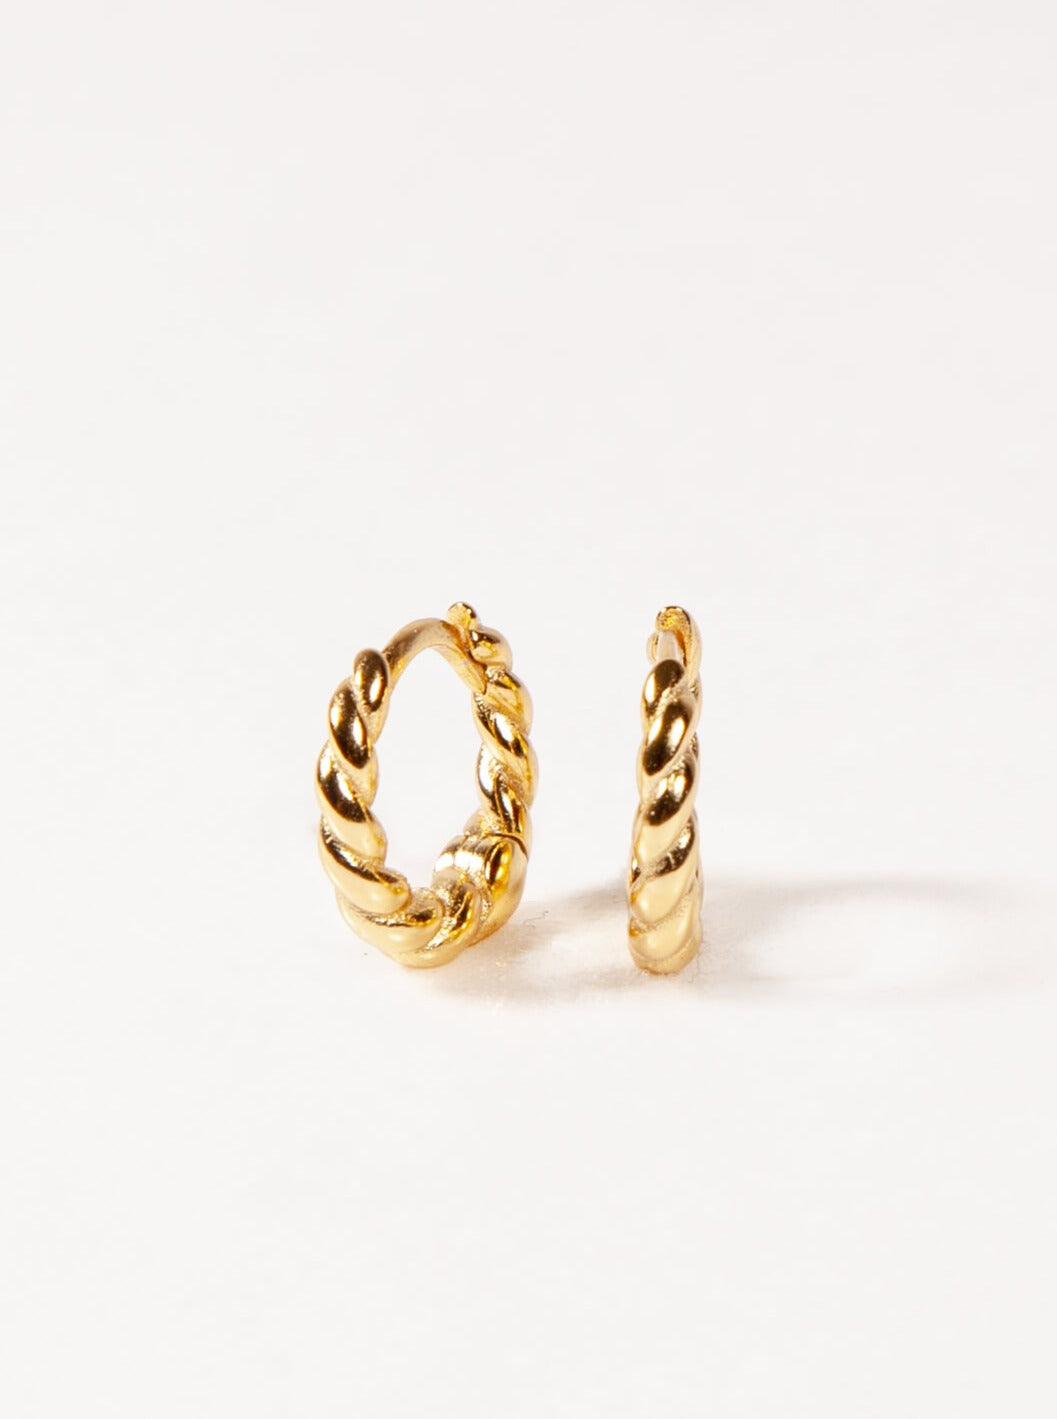 Twisted Huggies in 14K Gold Sterling Silver